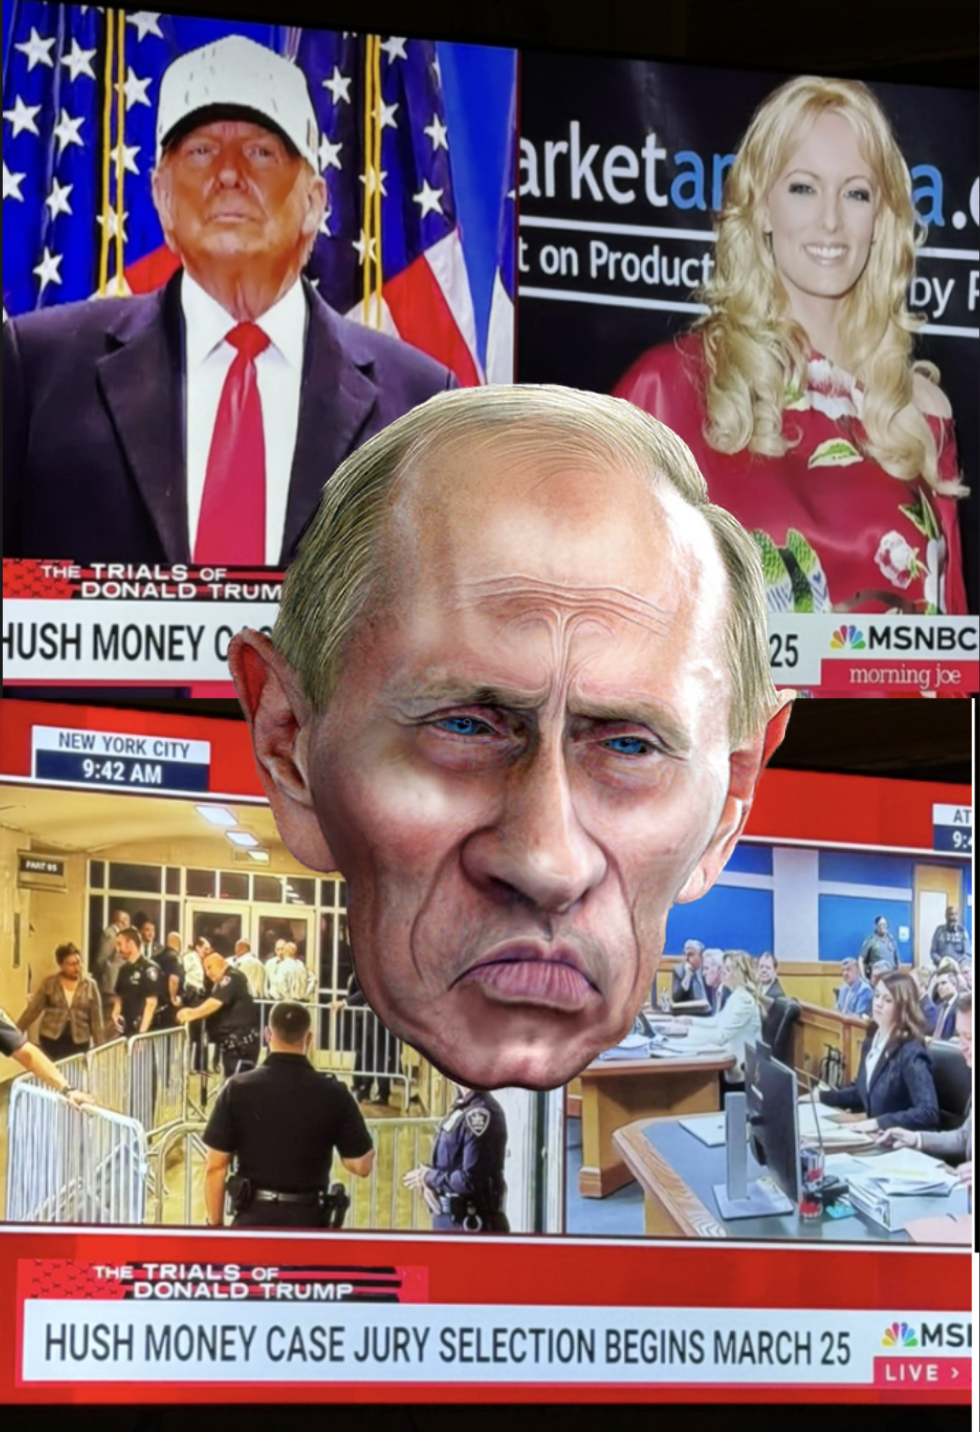 Unpacking Putin on presidents: is it more about personality than policies? by Hal Brown, MSW